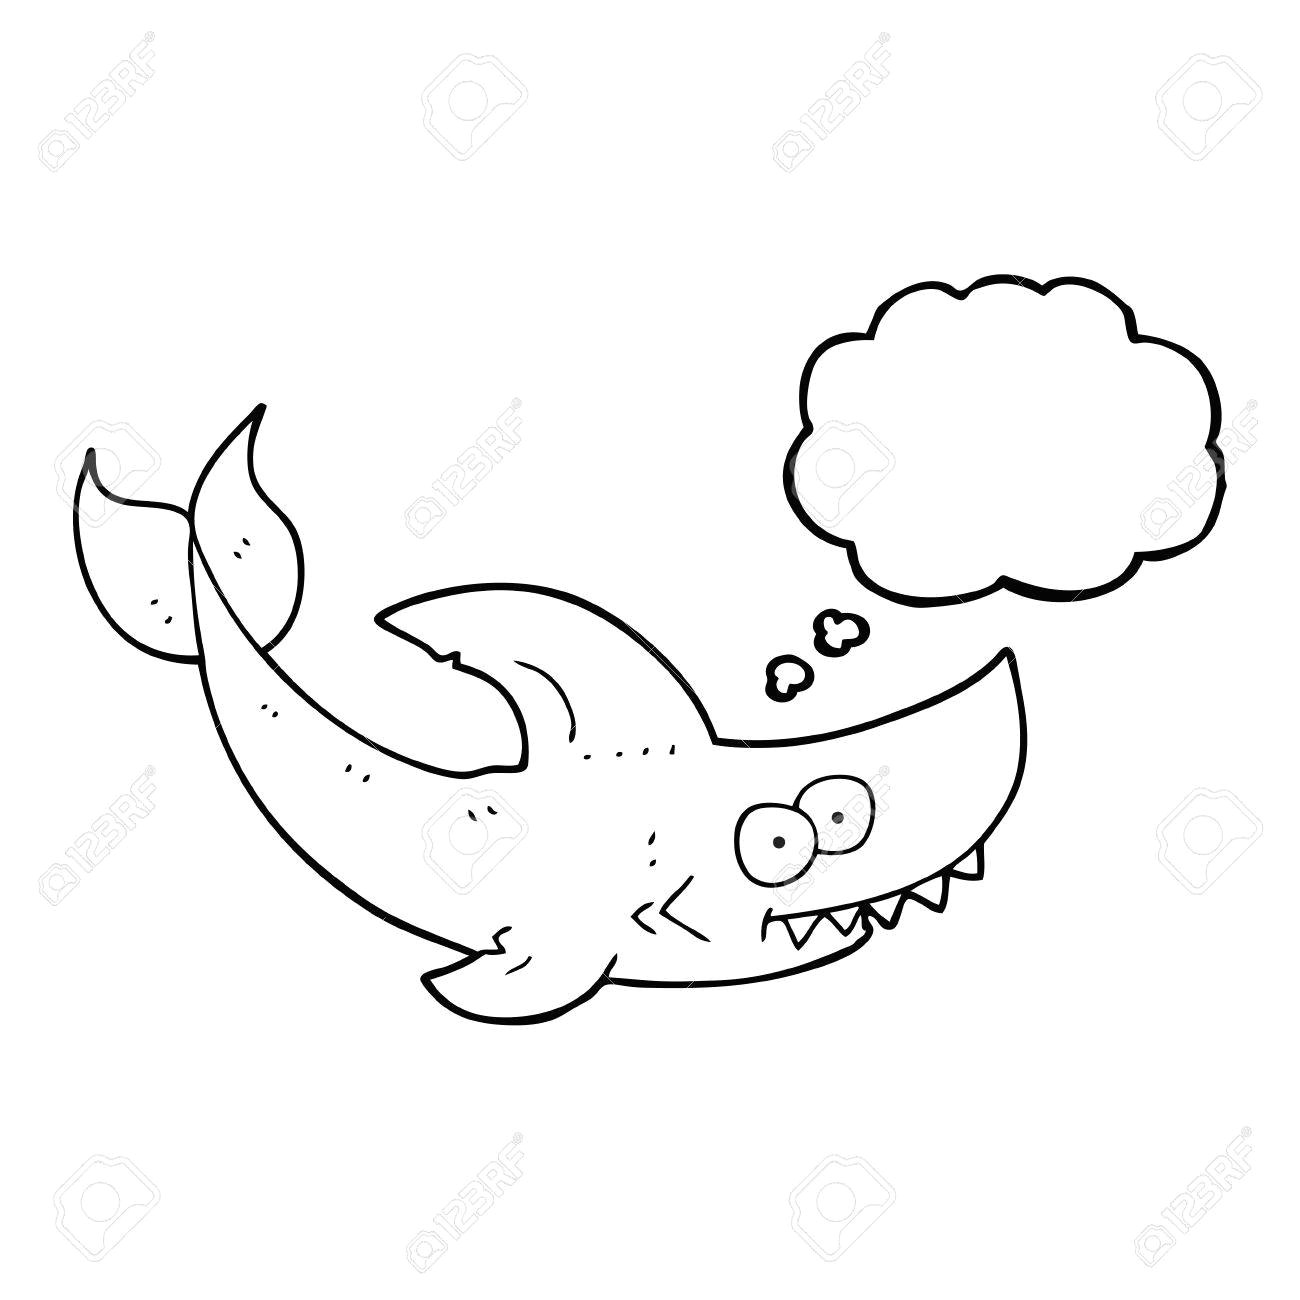 freehand drawn thought bubble cartoon shark stock vector 53109168